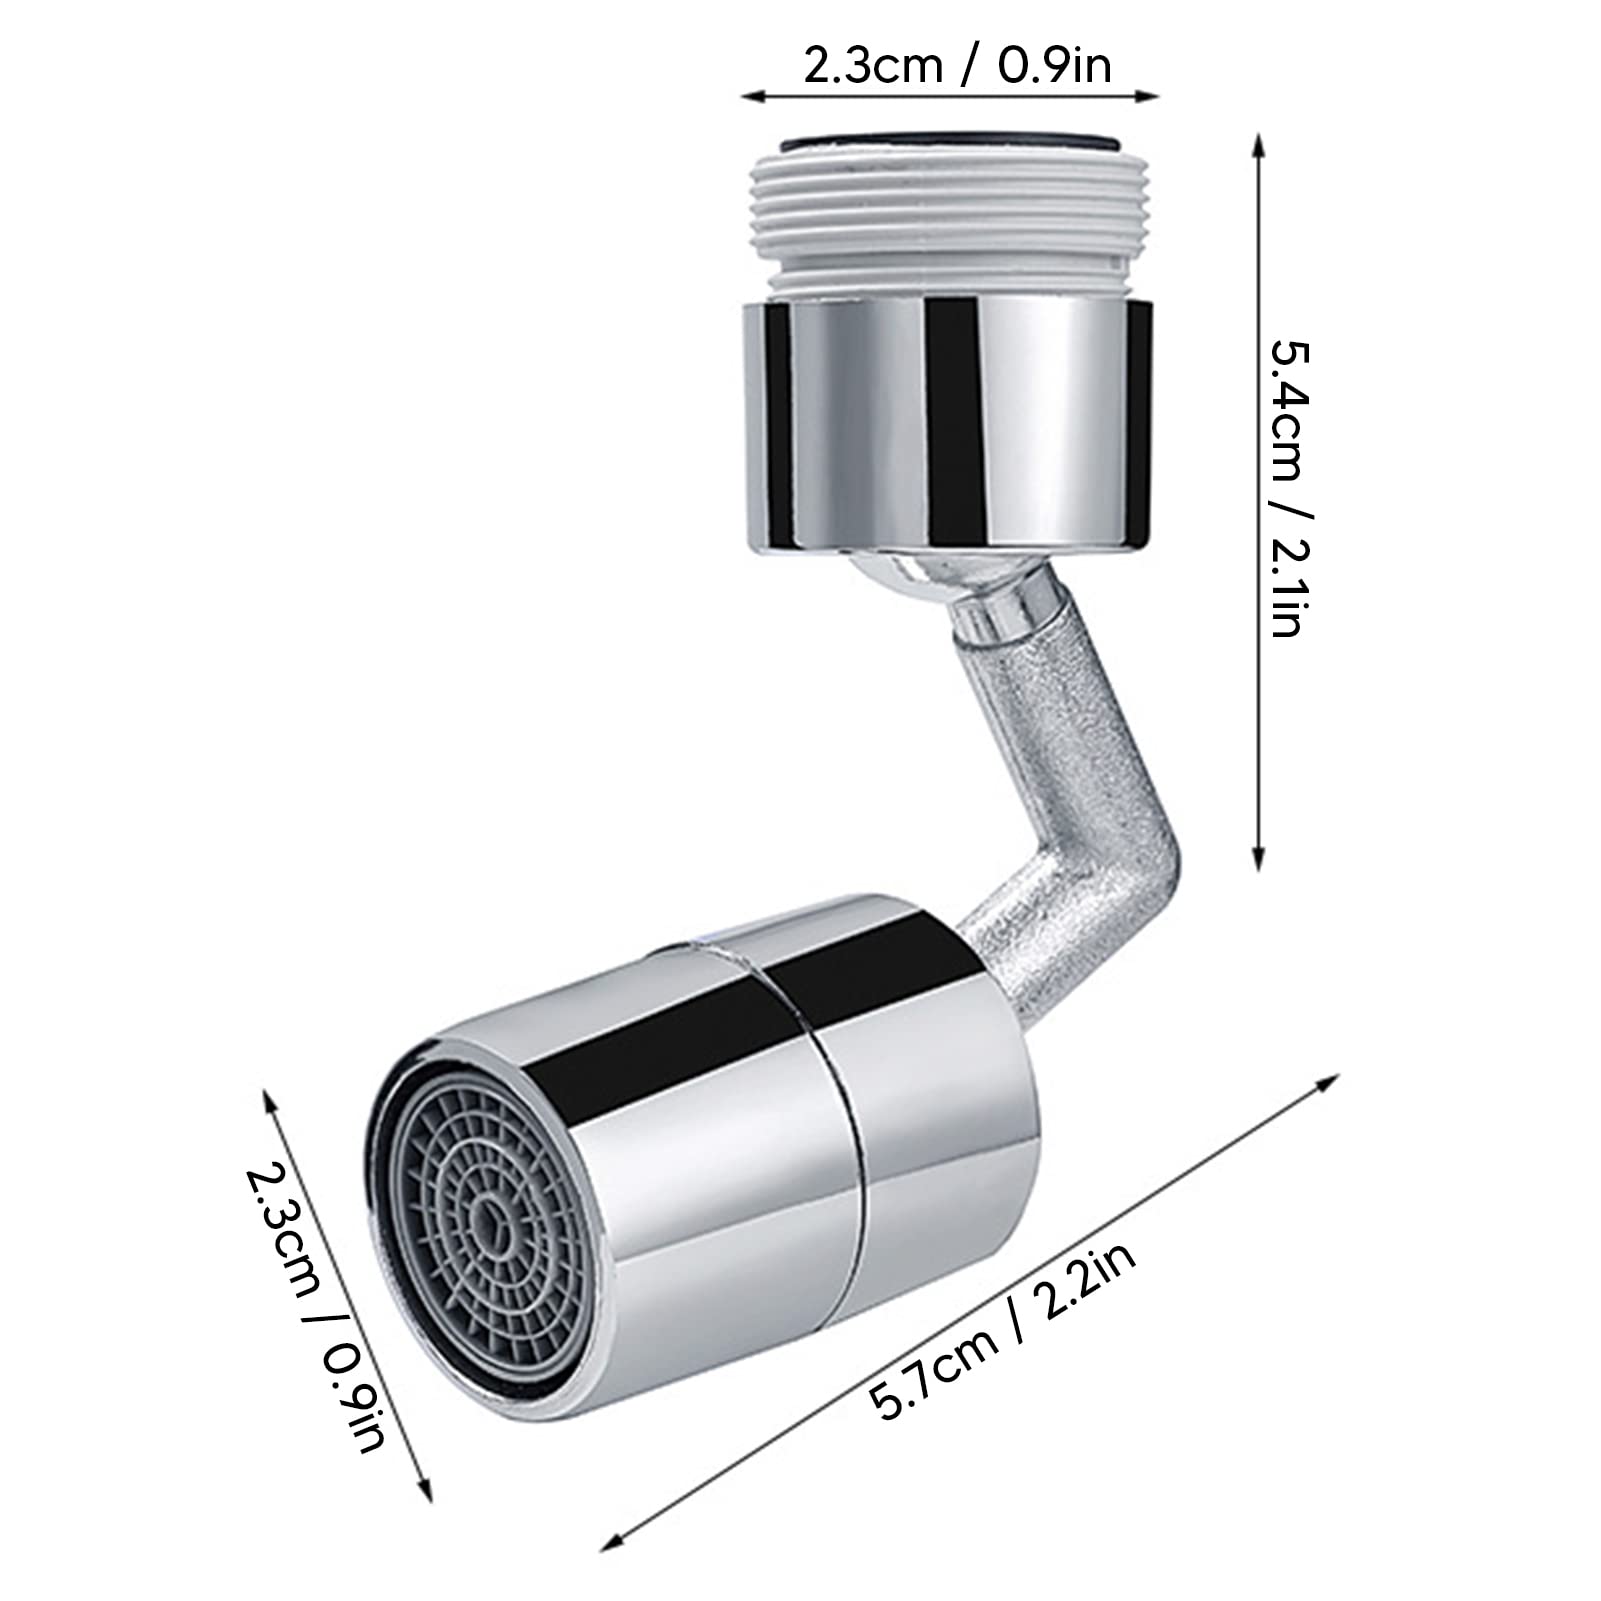 360 Degree Swivel Faucet Extender, Faucet Extender for Bathroom Sink, Splash Proof Large Angle Rotating Faucet Extender, Soft Water Discharge for Home Bathroom, Kitchen, Restaurant